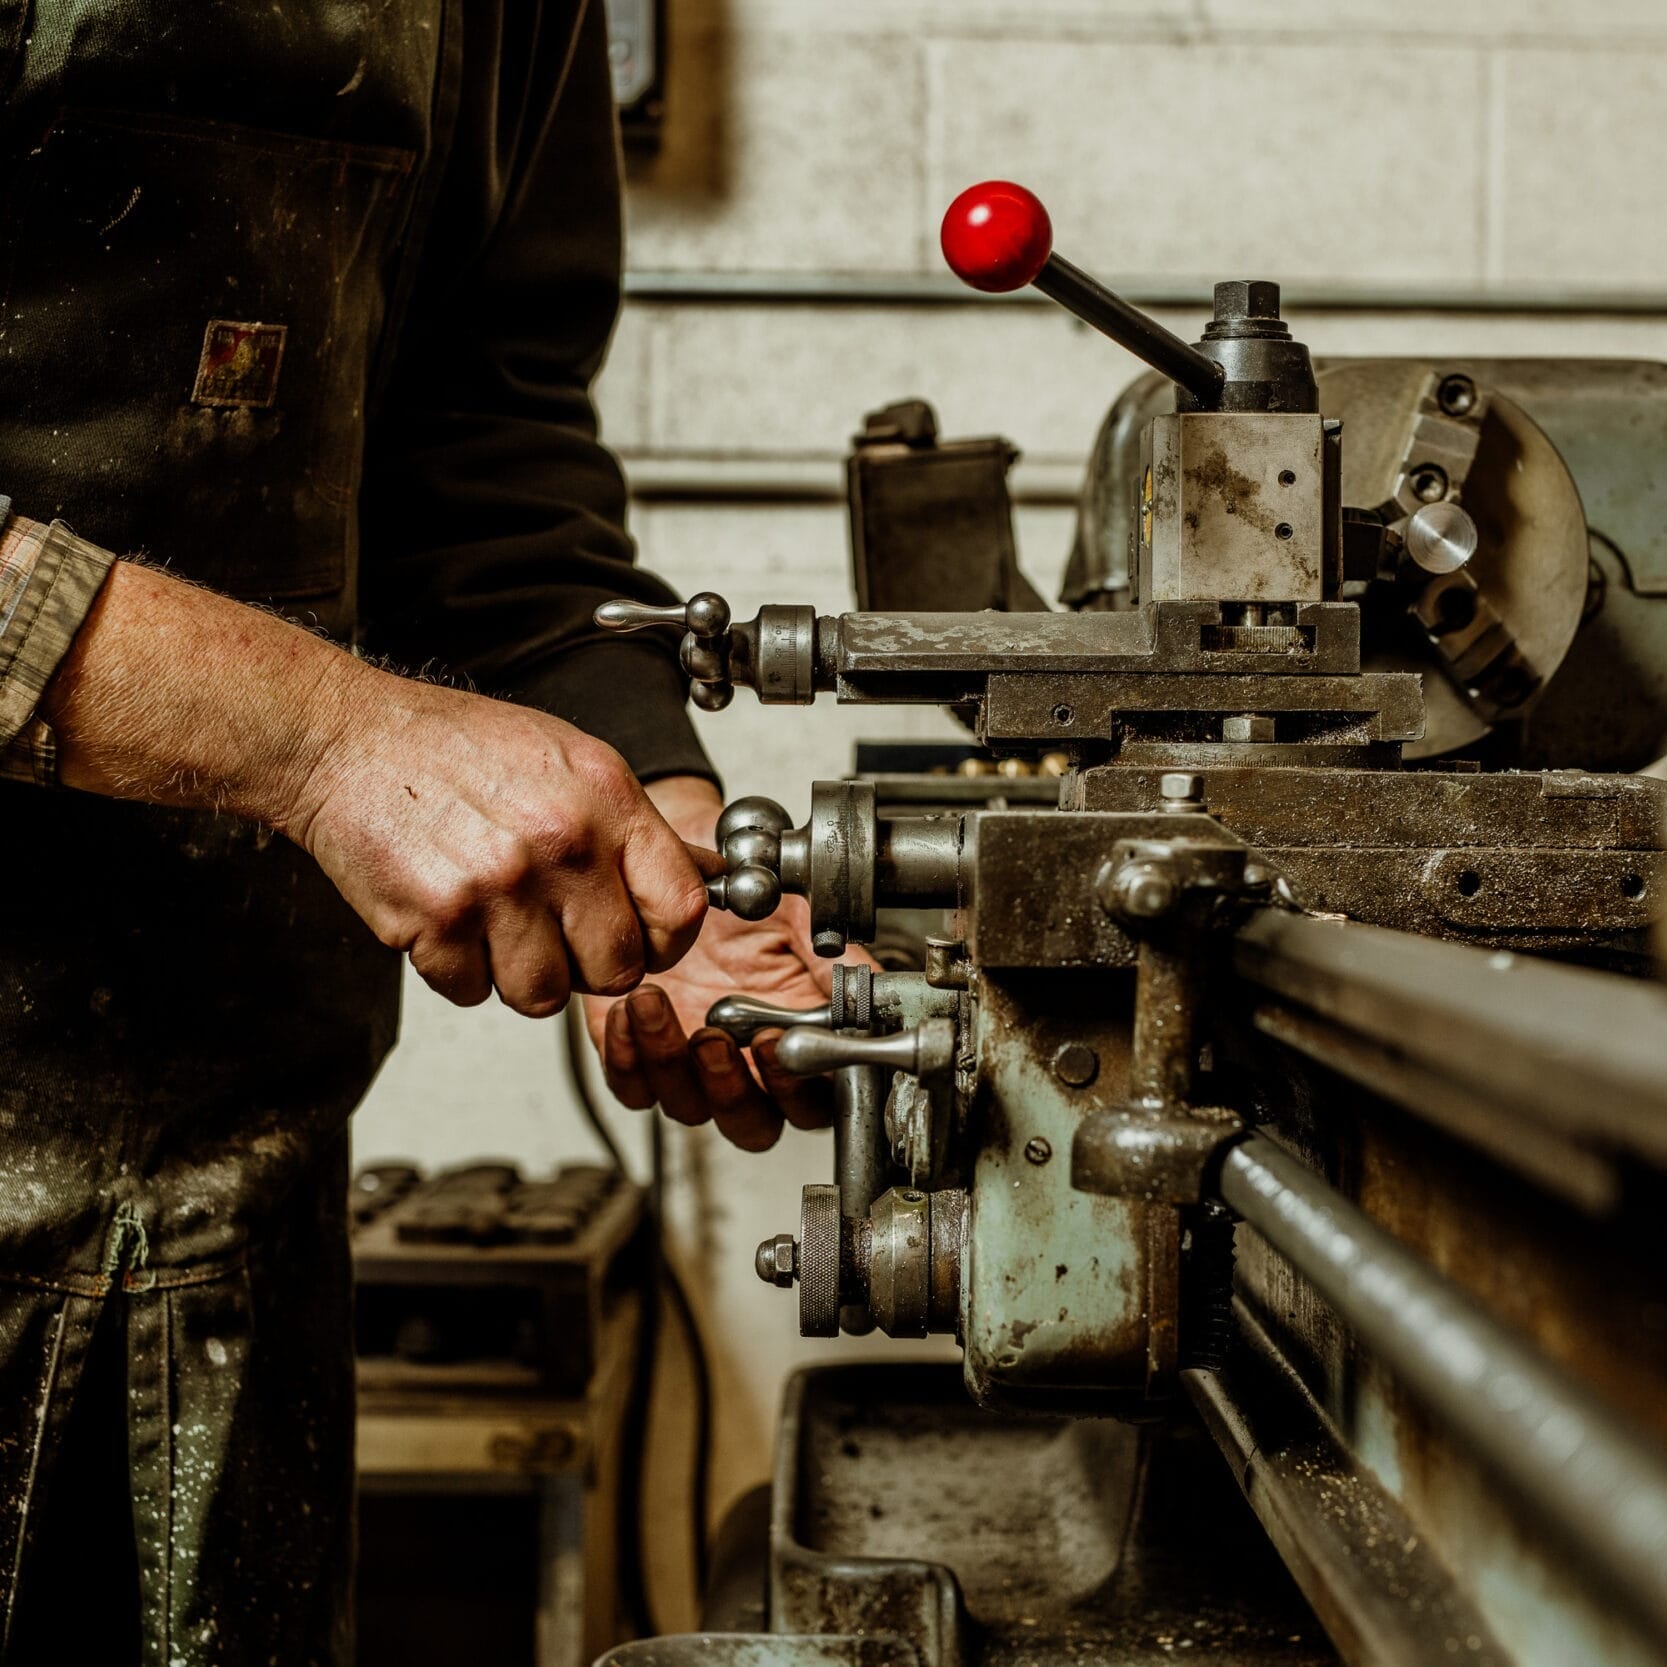 A man working on a lathe in Dyna Metal Shop Seattle.